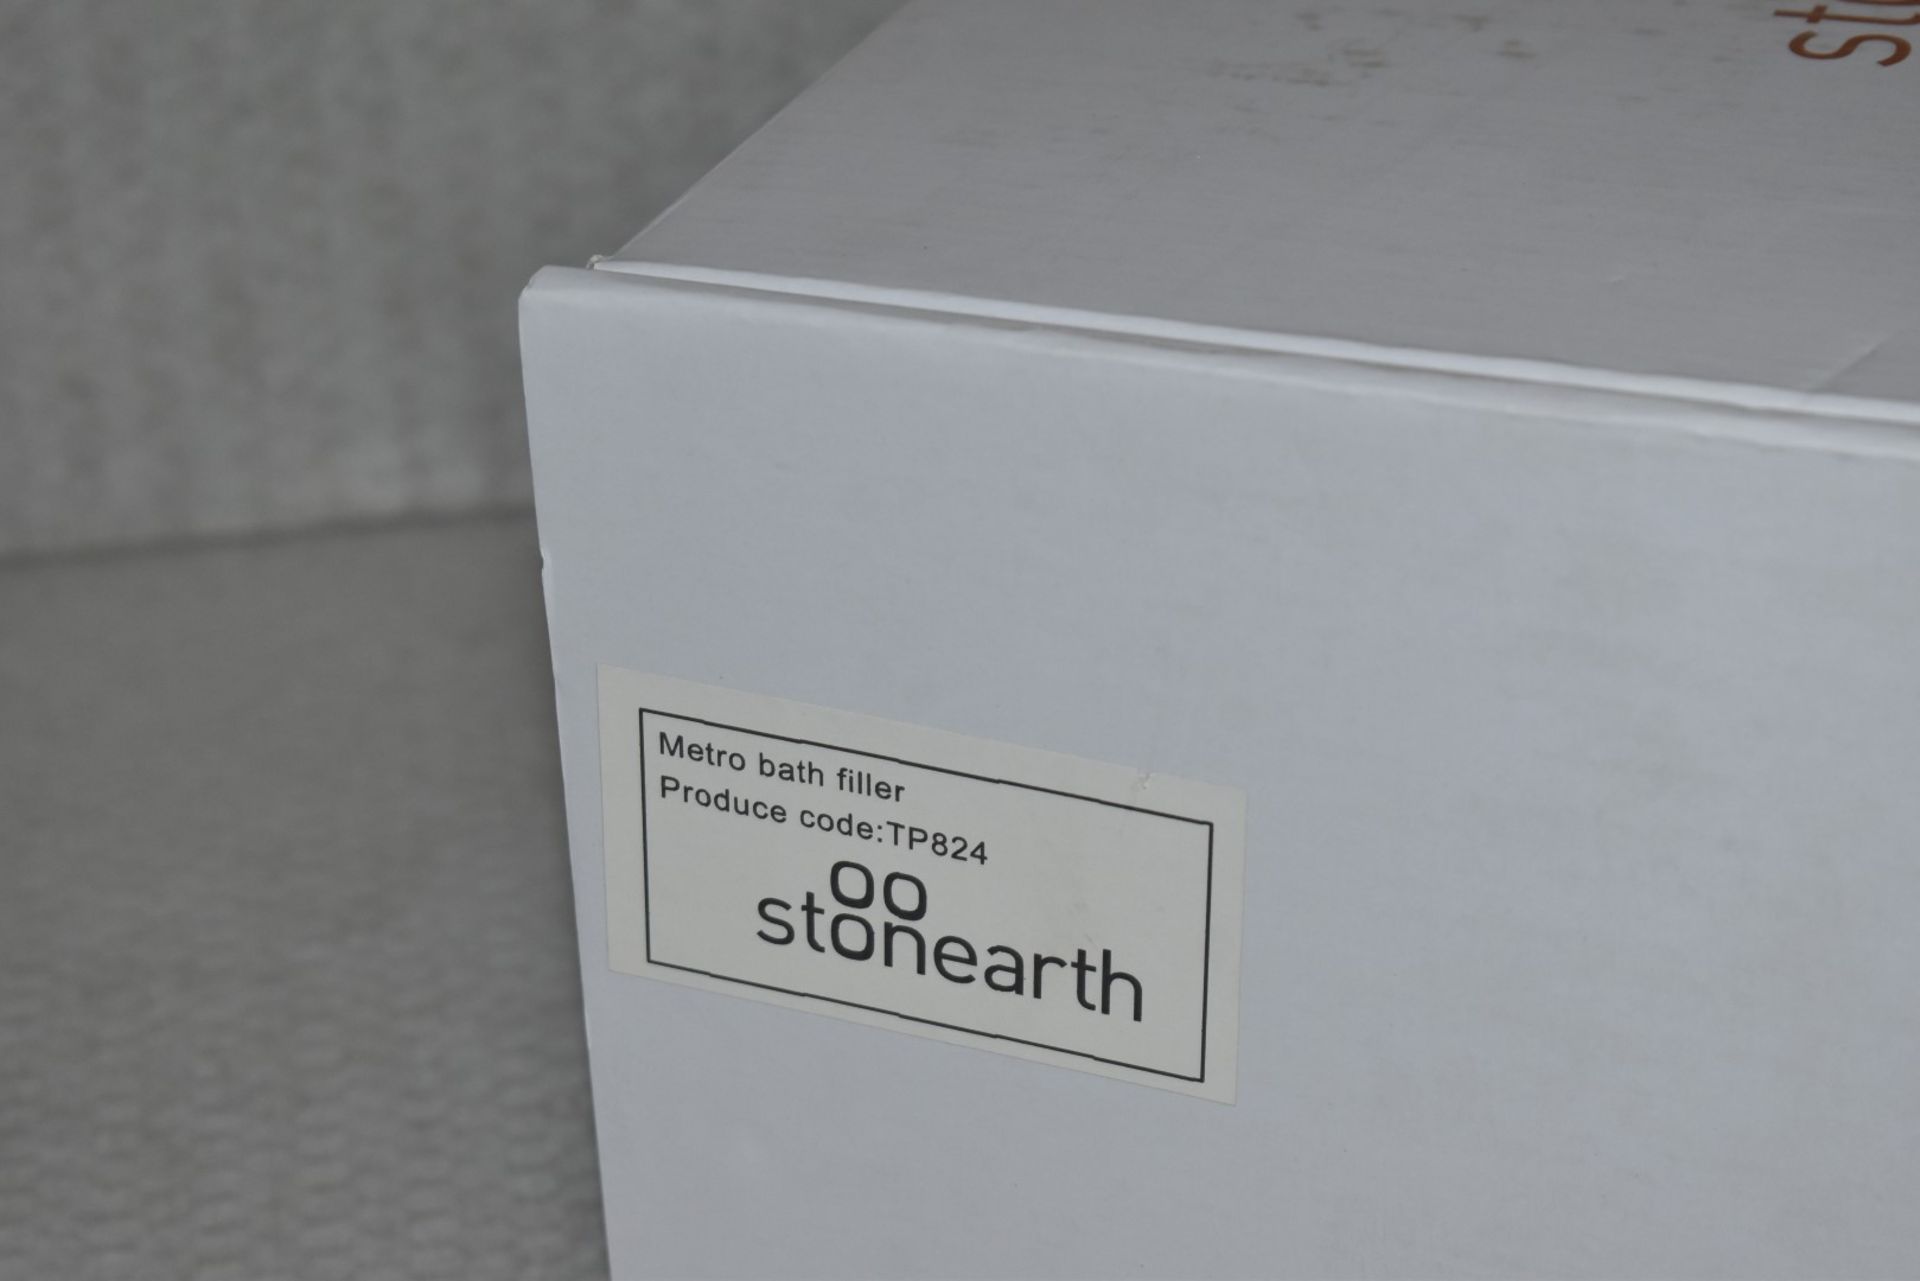 1 x Stonearth 'Metro' Stainless Steel Bath Filler Mixer Tap - Brand New & Boxed - RRP £340 - Ref: - Image 14 of 15